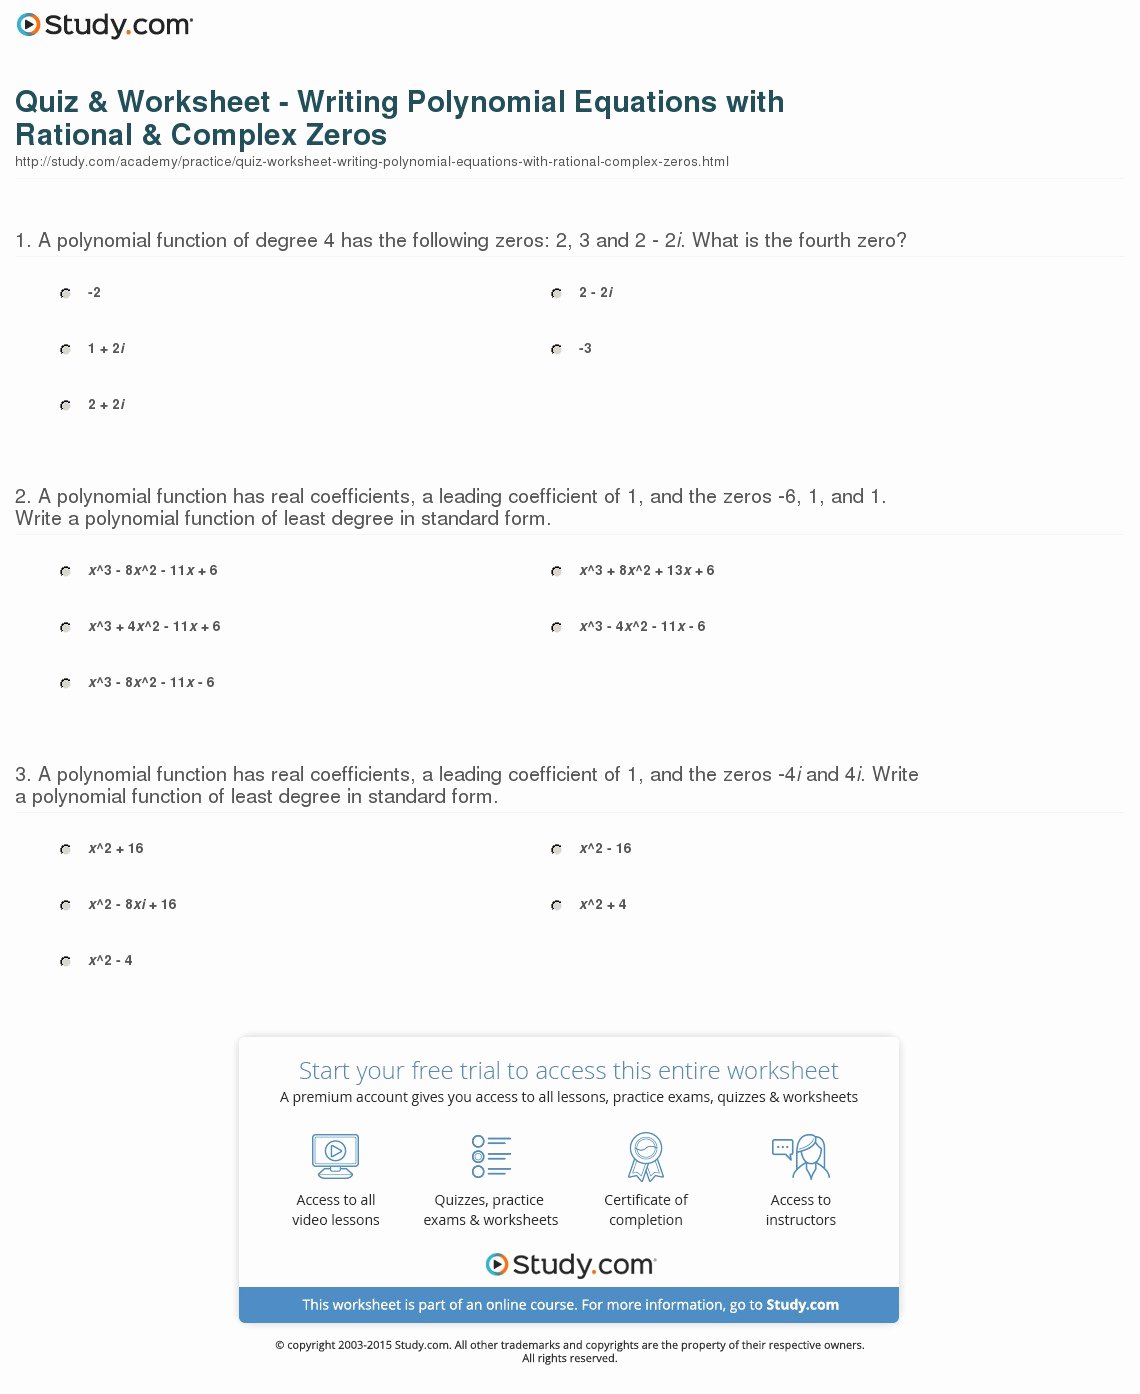 Solving Polynomial Equations Worksheet Answers Awesome Quiz &amp; Worksheet Writing Polynomial Equations with